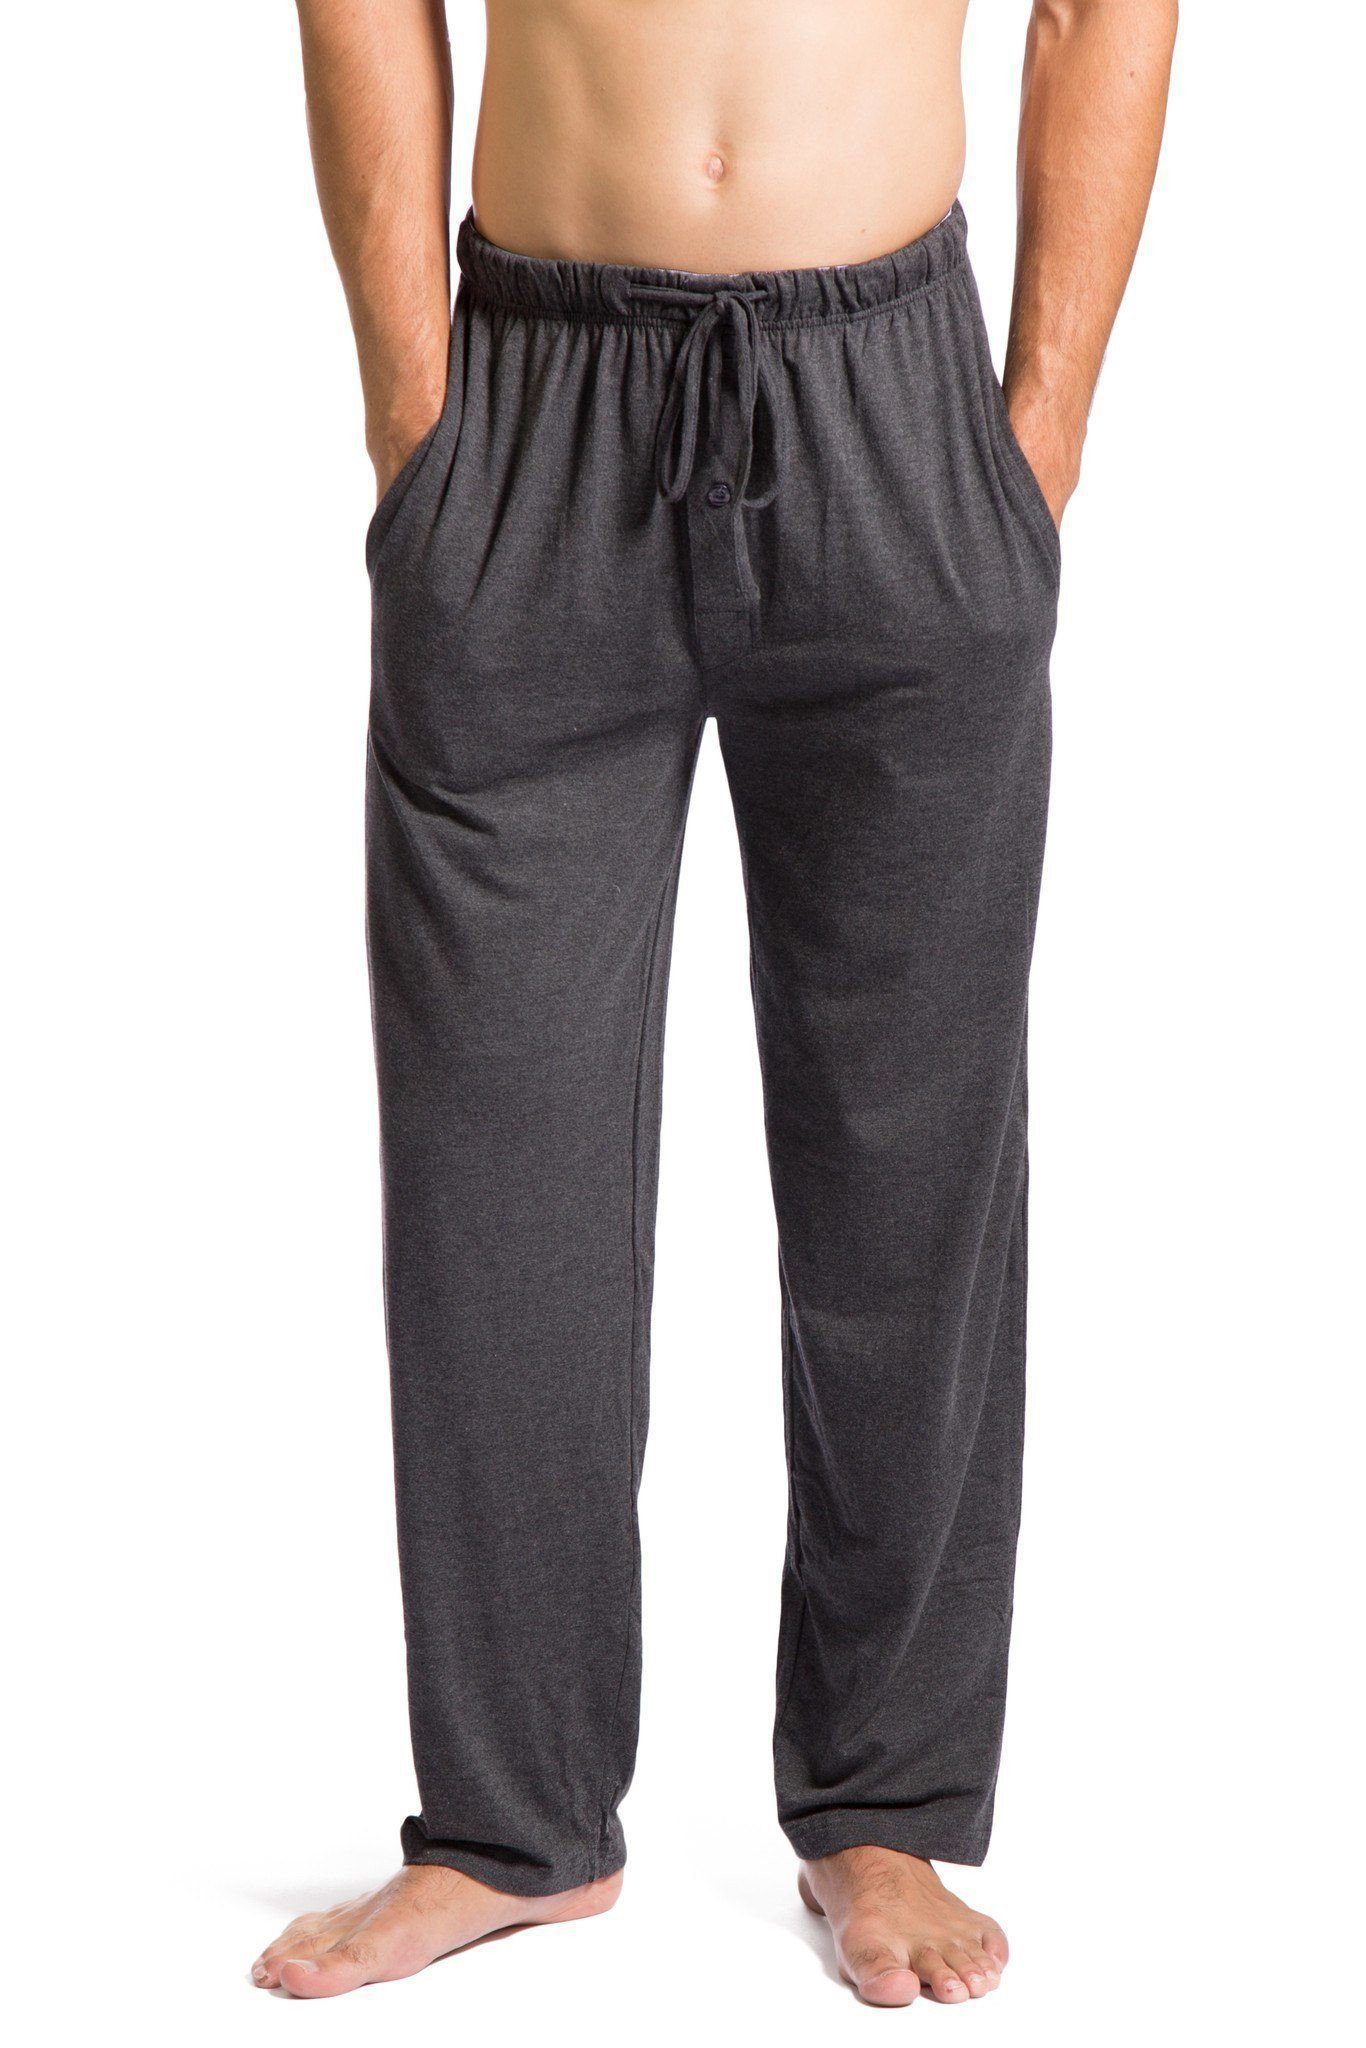 Womens Tranquil Days Tracksuit Bottoms